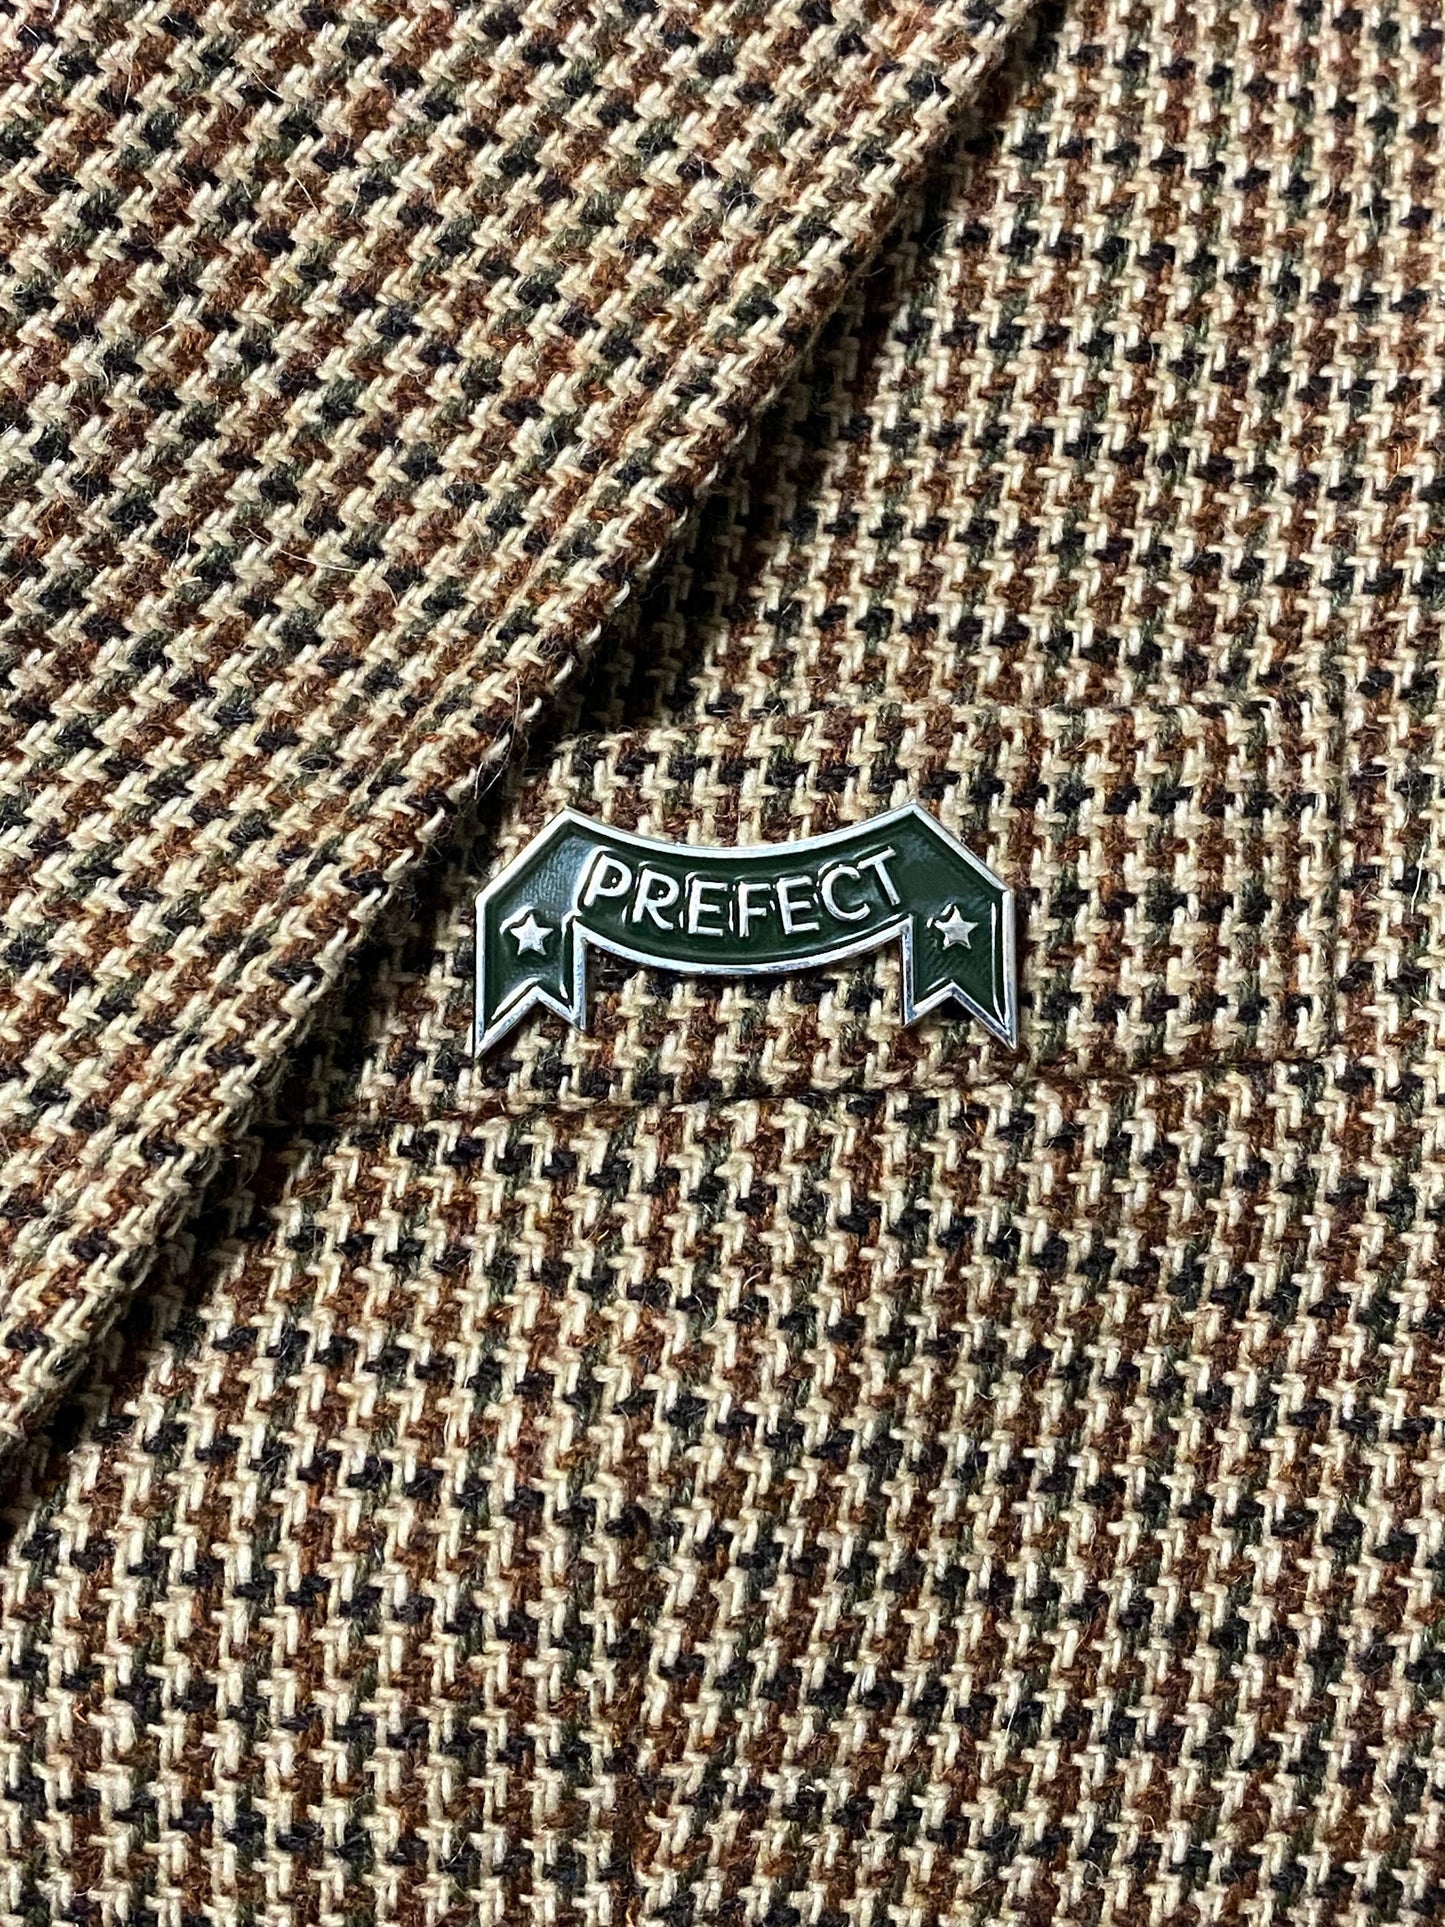 Prefect vintage enamel pin green and silver wizarding world